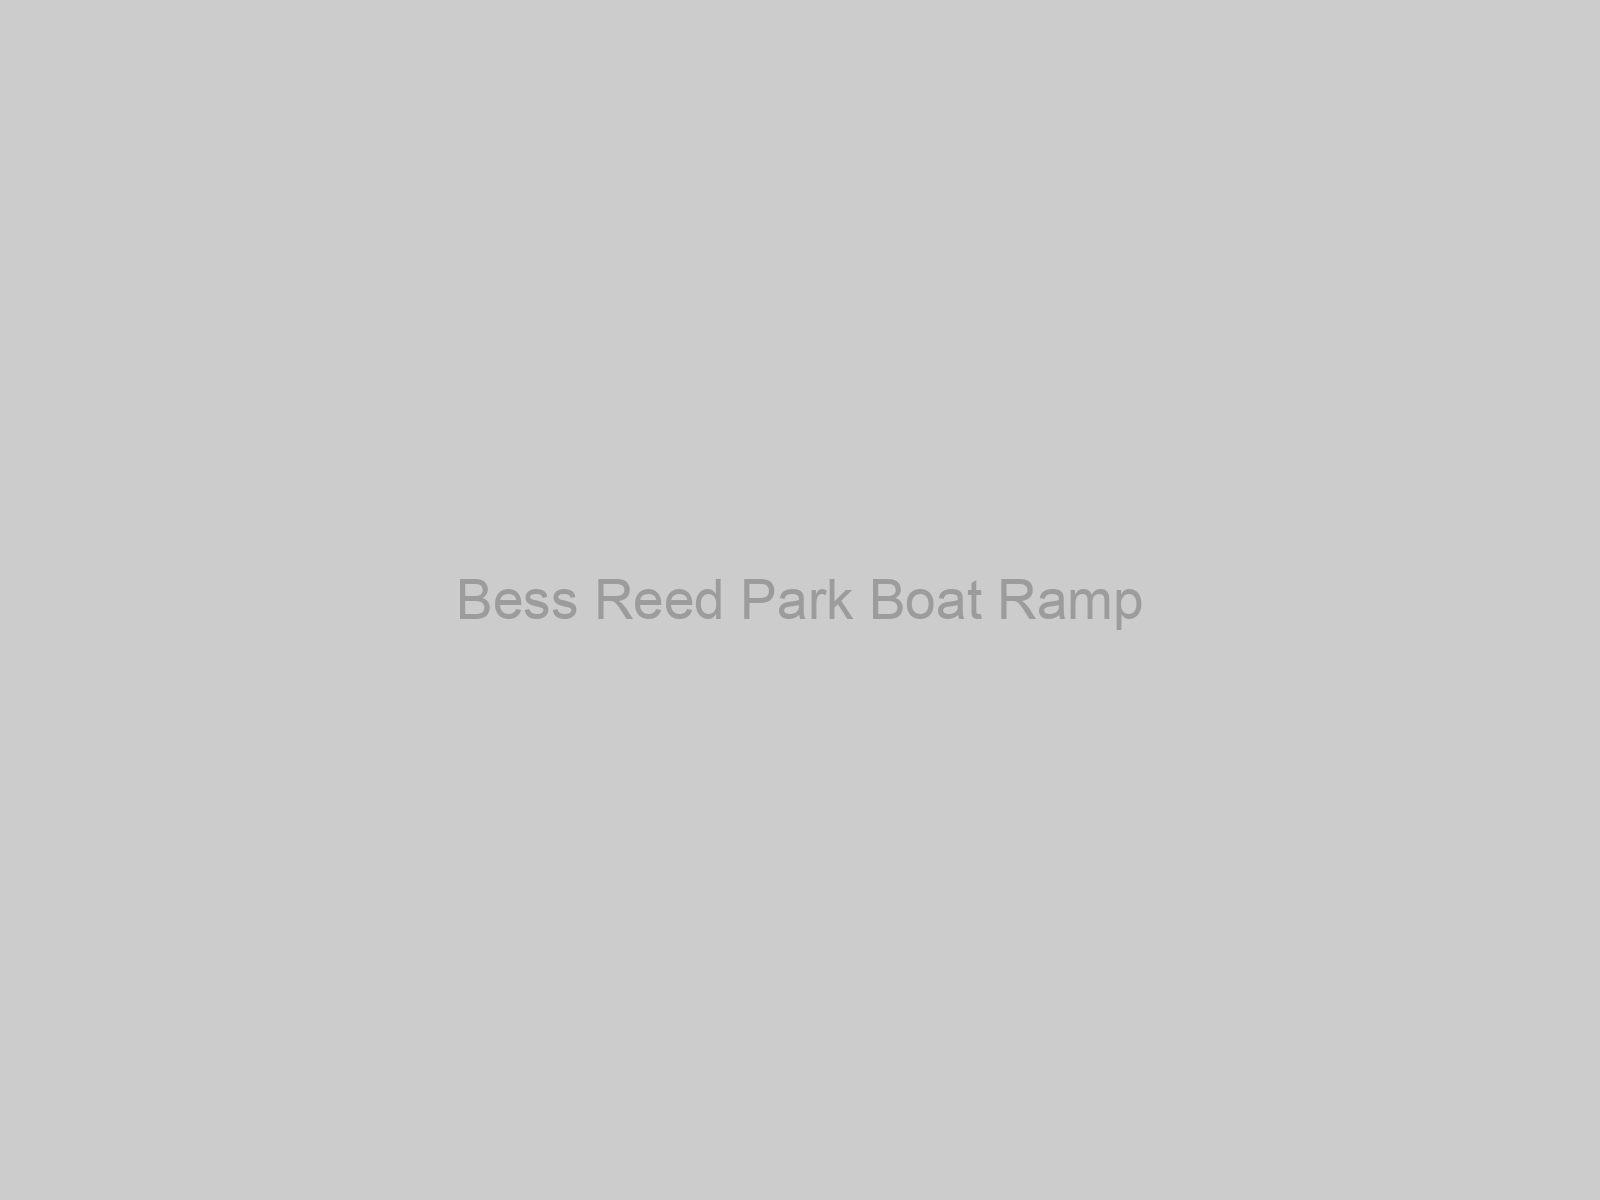 Bess Reed Park Boat Ramp